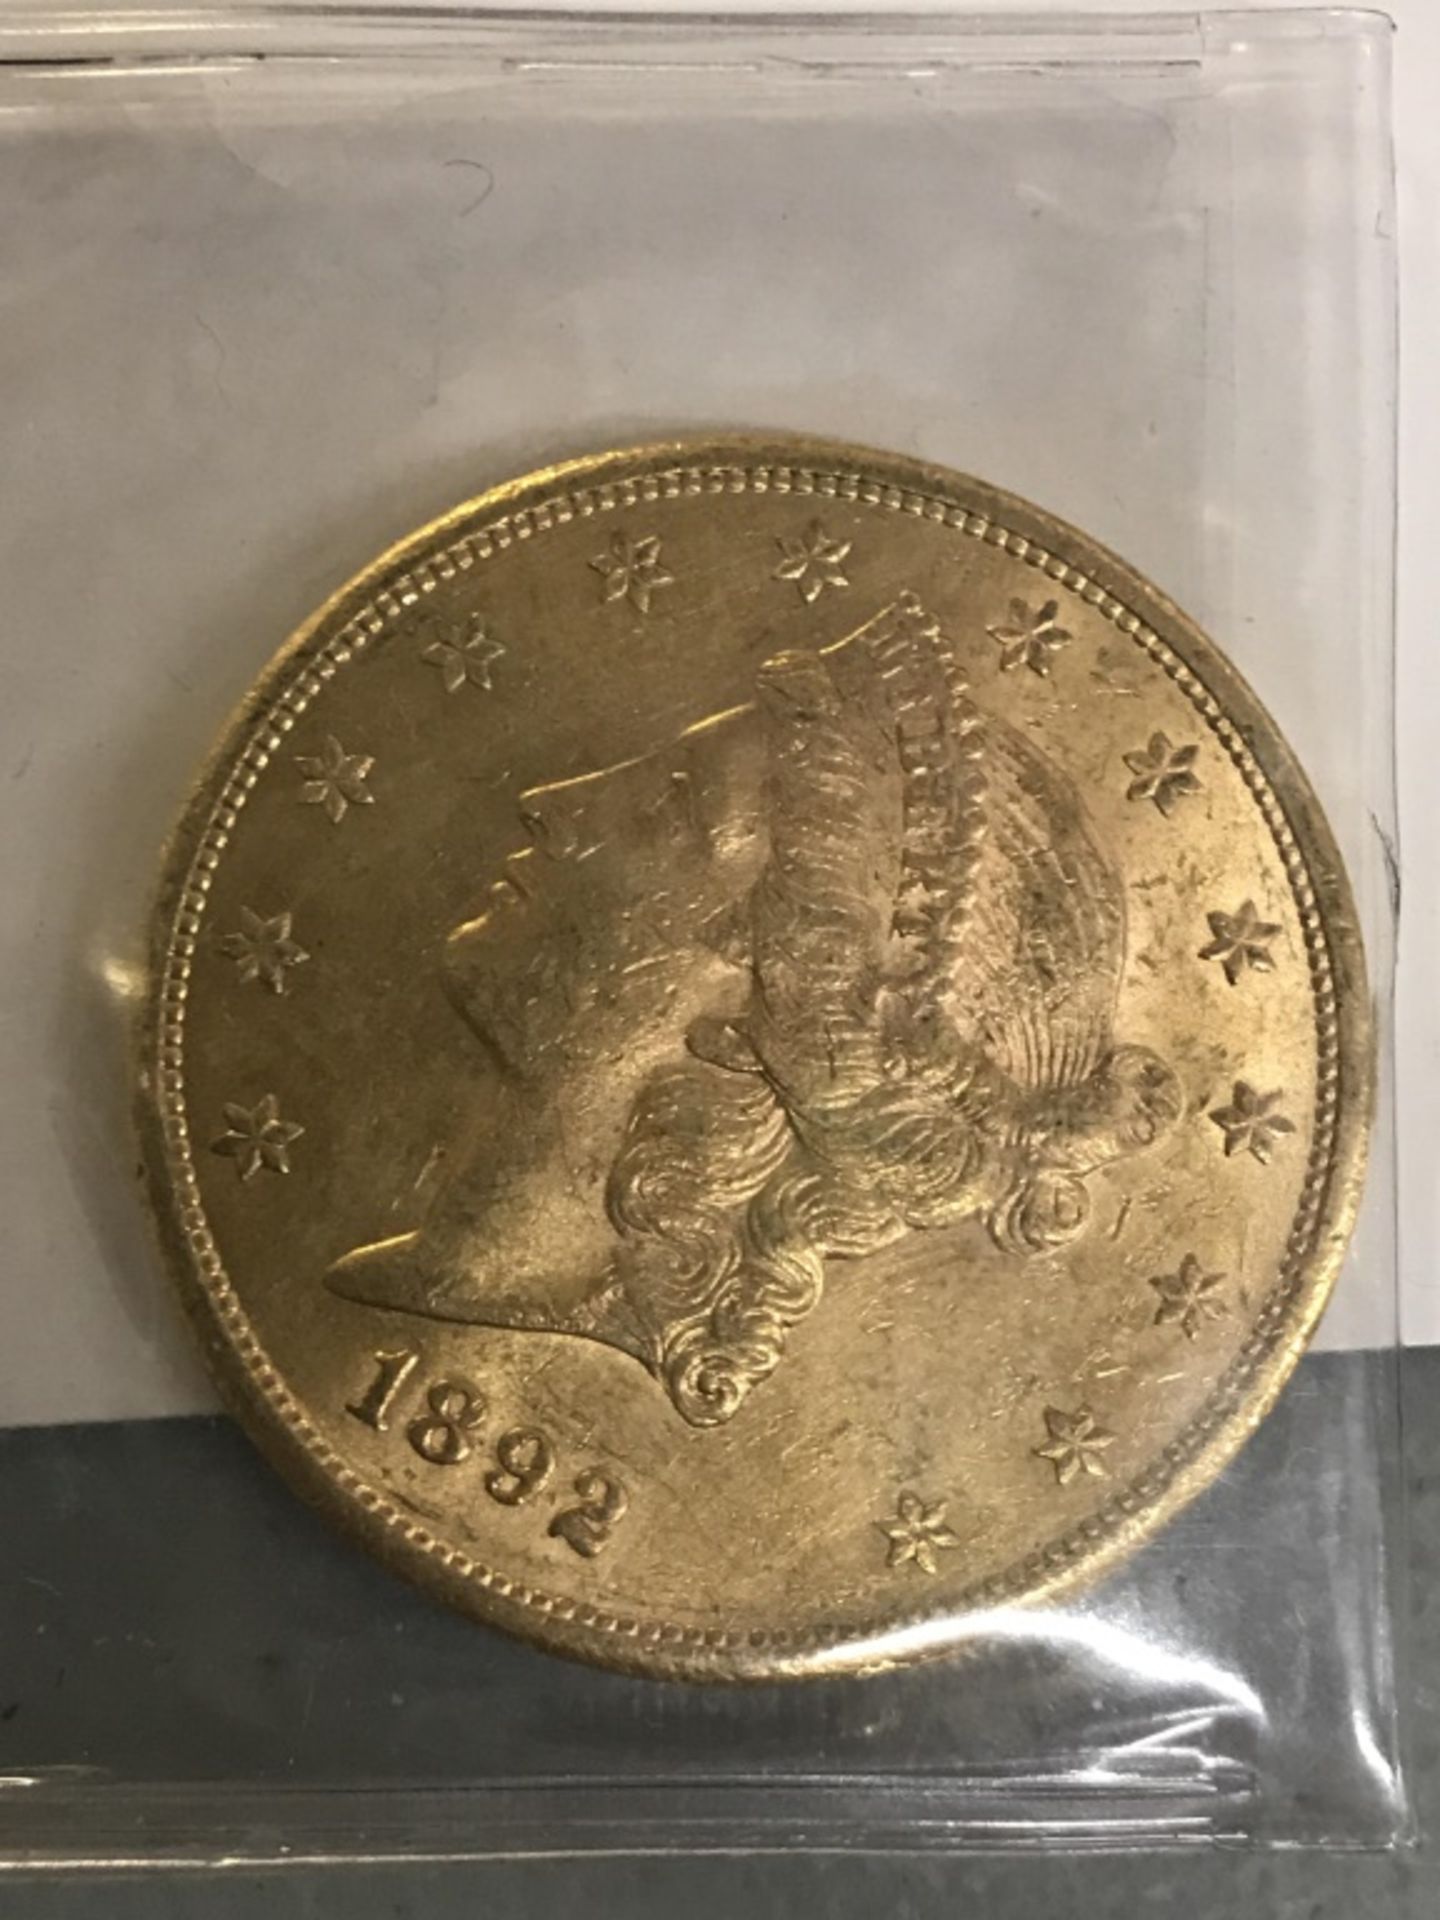 $20 Us Gold 1892 Coin - Image 4 of 9